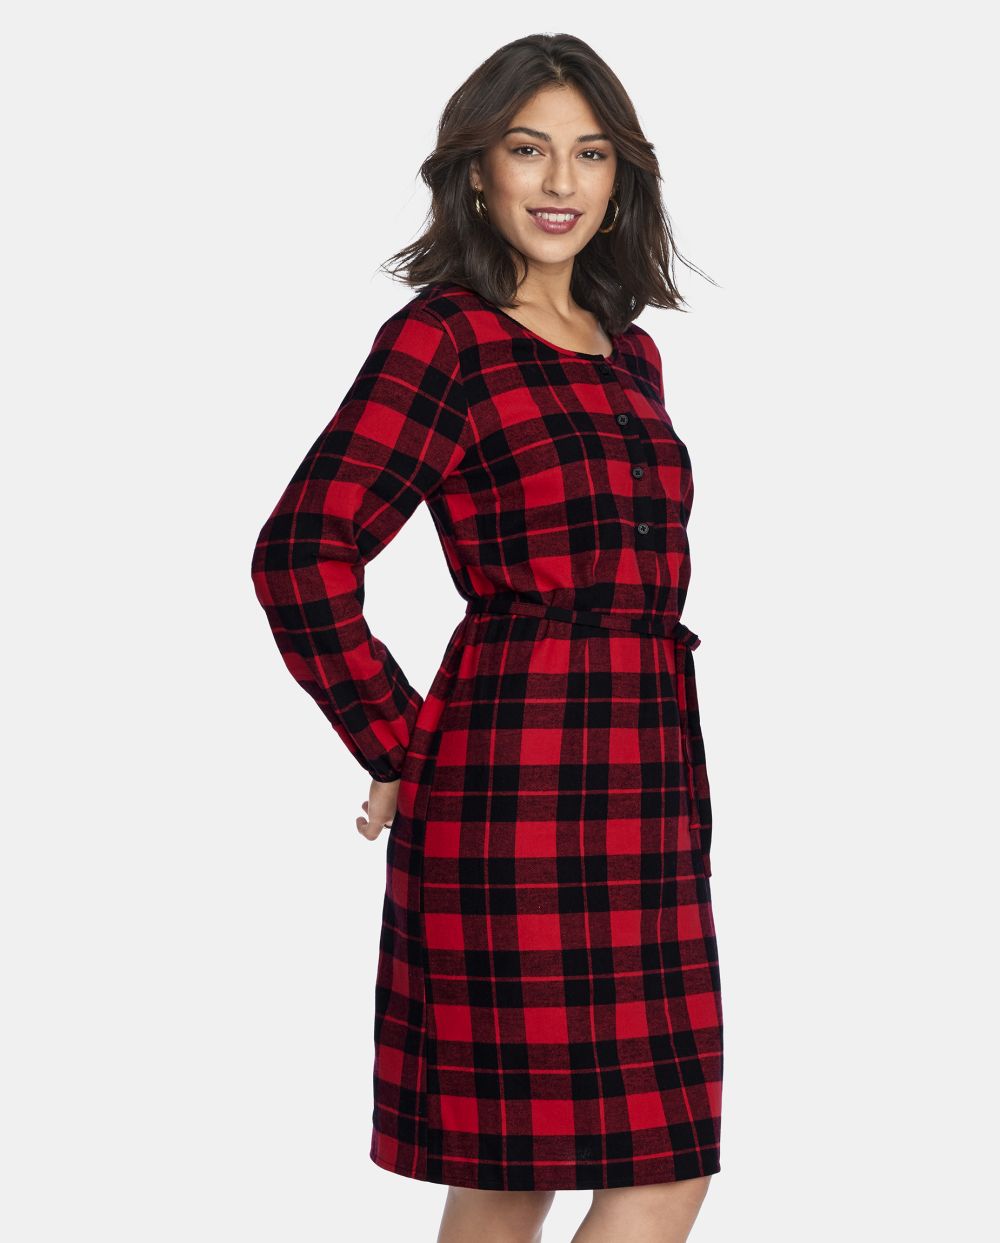 Plaid Print Tie Waist Waistline Above the Knee Crew Neck Belted Button Front Self Tie Long Sleeves Shirt Dress